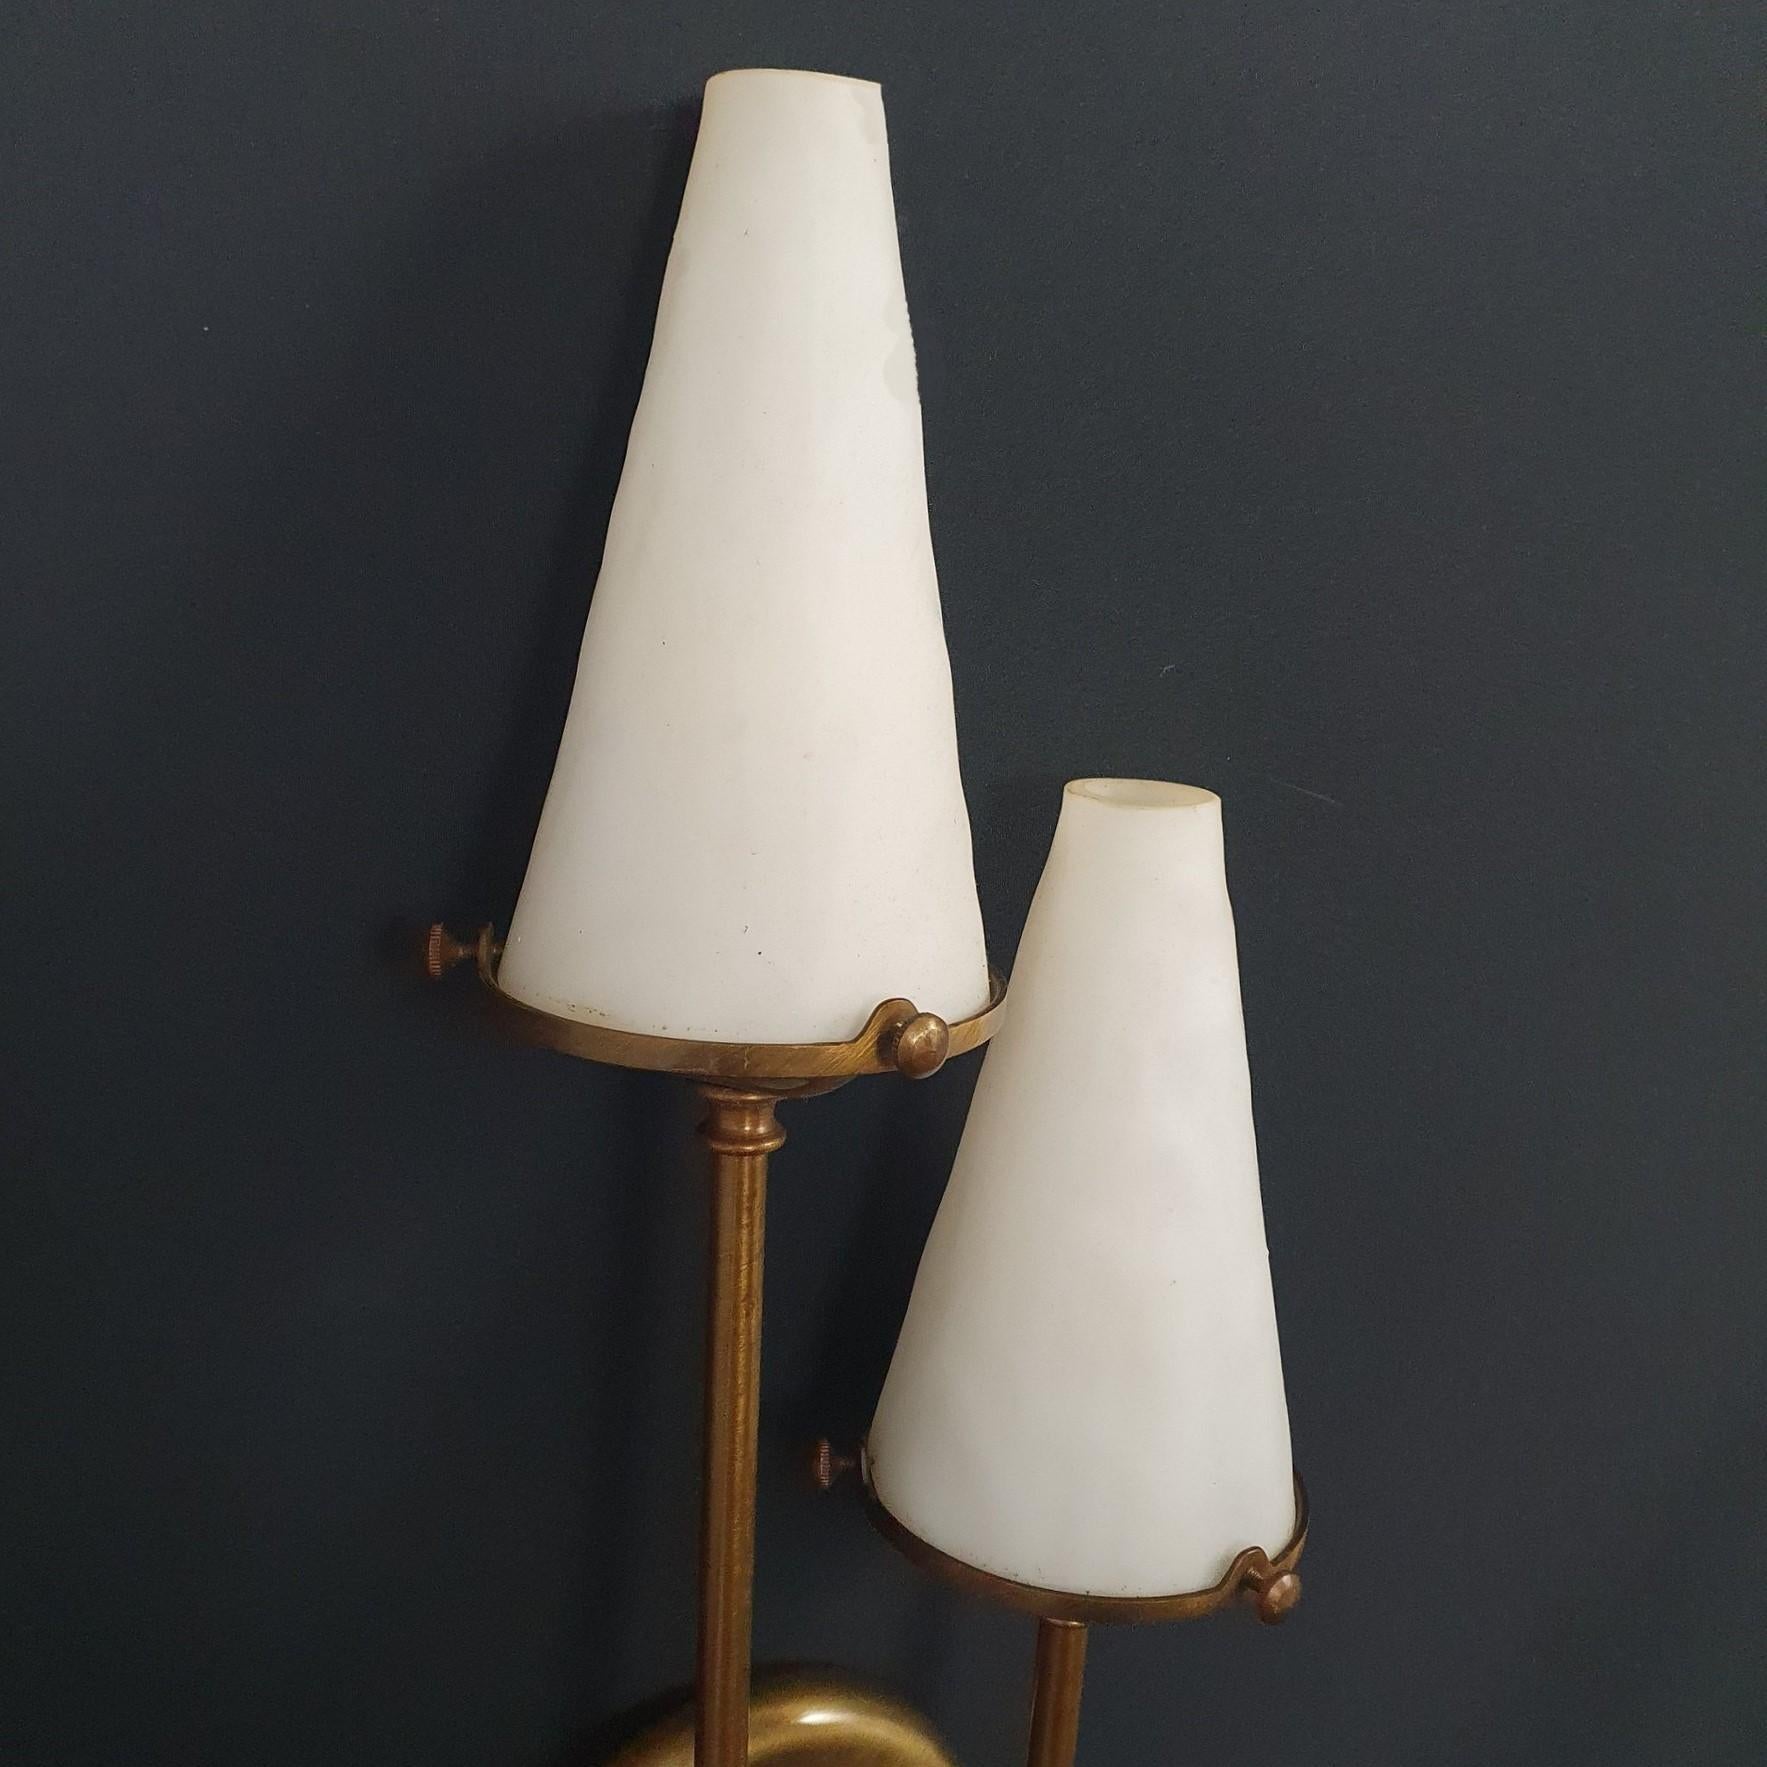 Bronzed Maison Jansen Style Double Brass Glass Wall Sconce, Wall Light France, 1950s For Sale